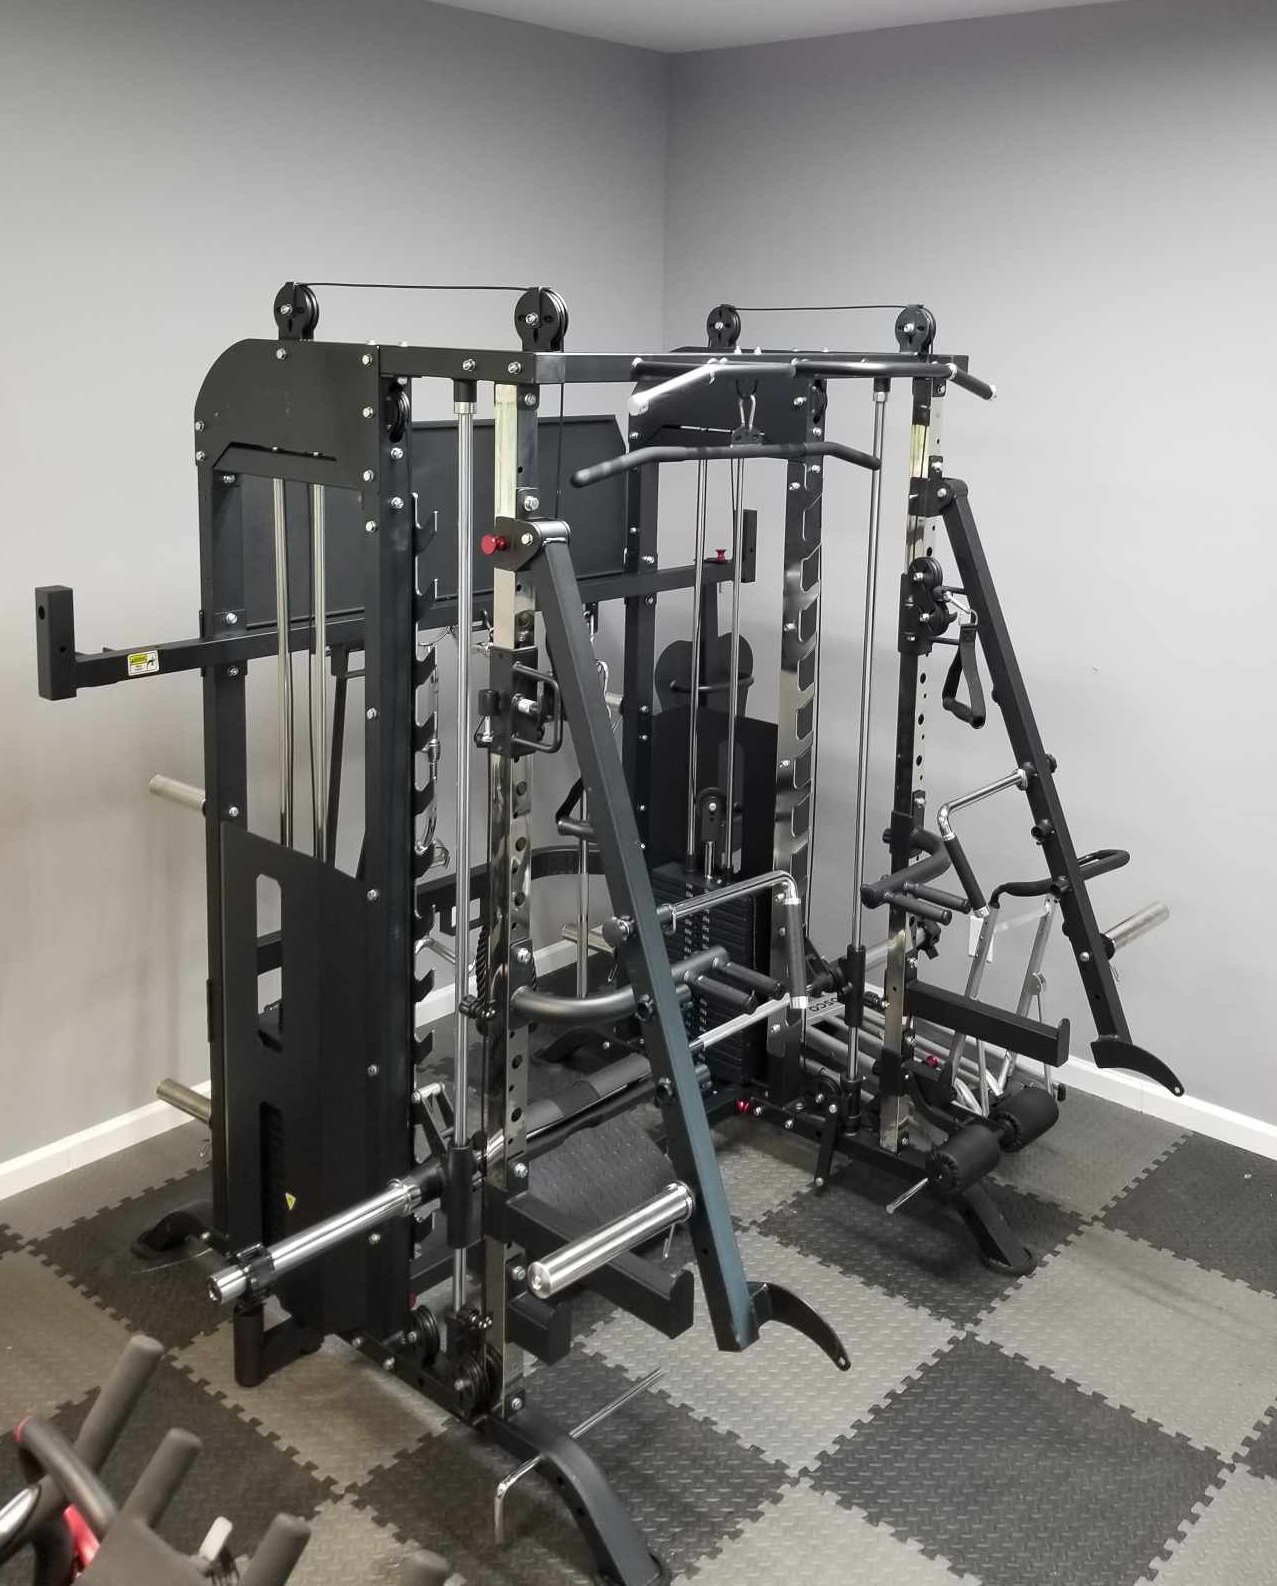 French Fitness FSR90 - Real Photos in a Customers Home | Fitness Superstore